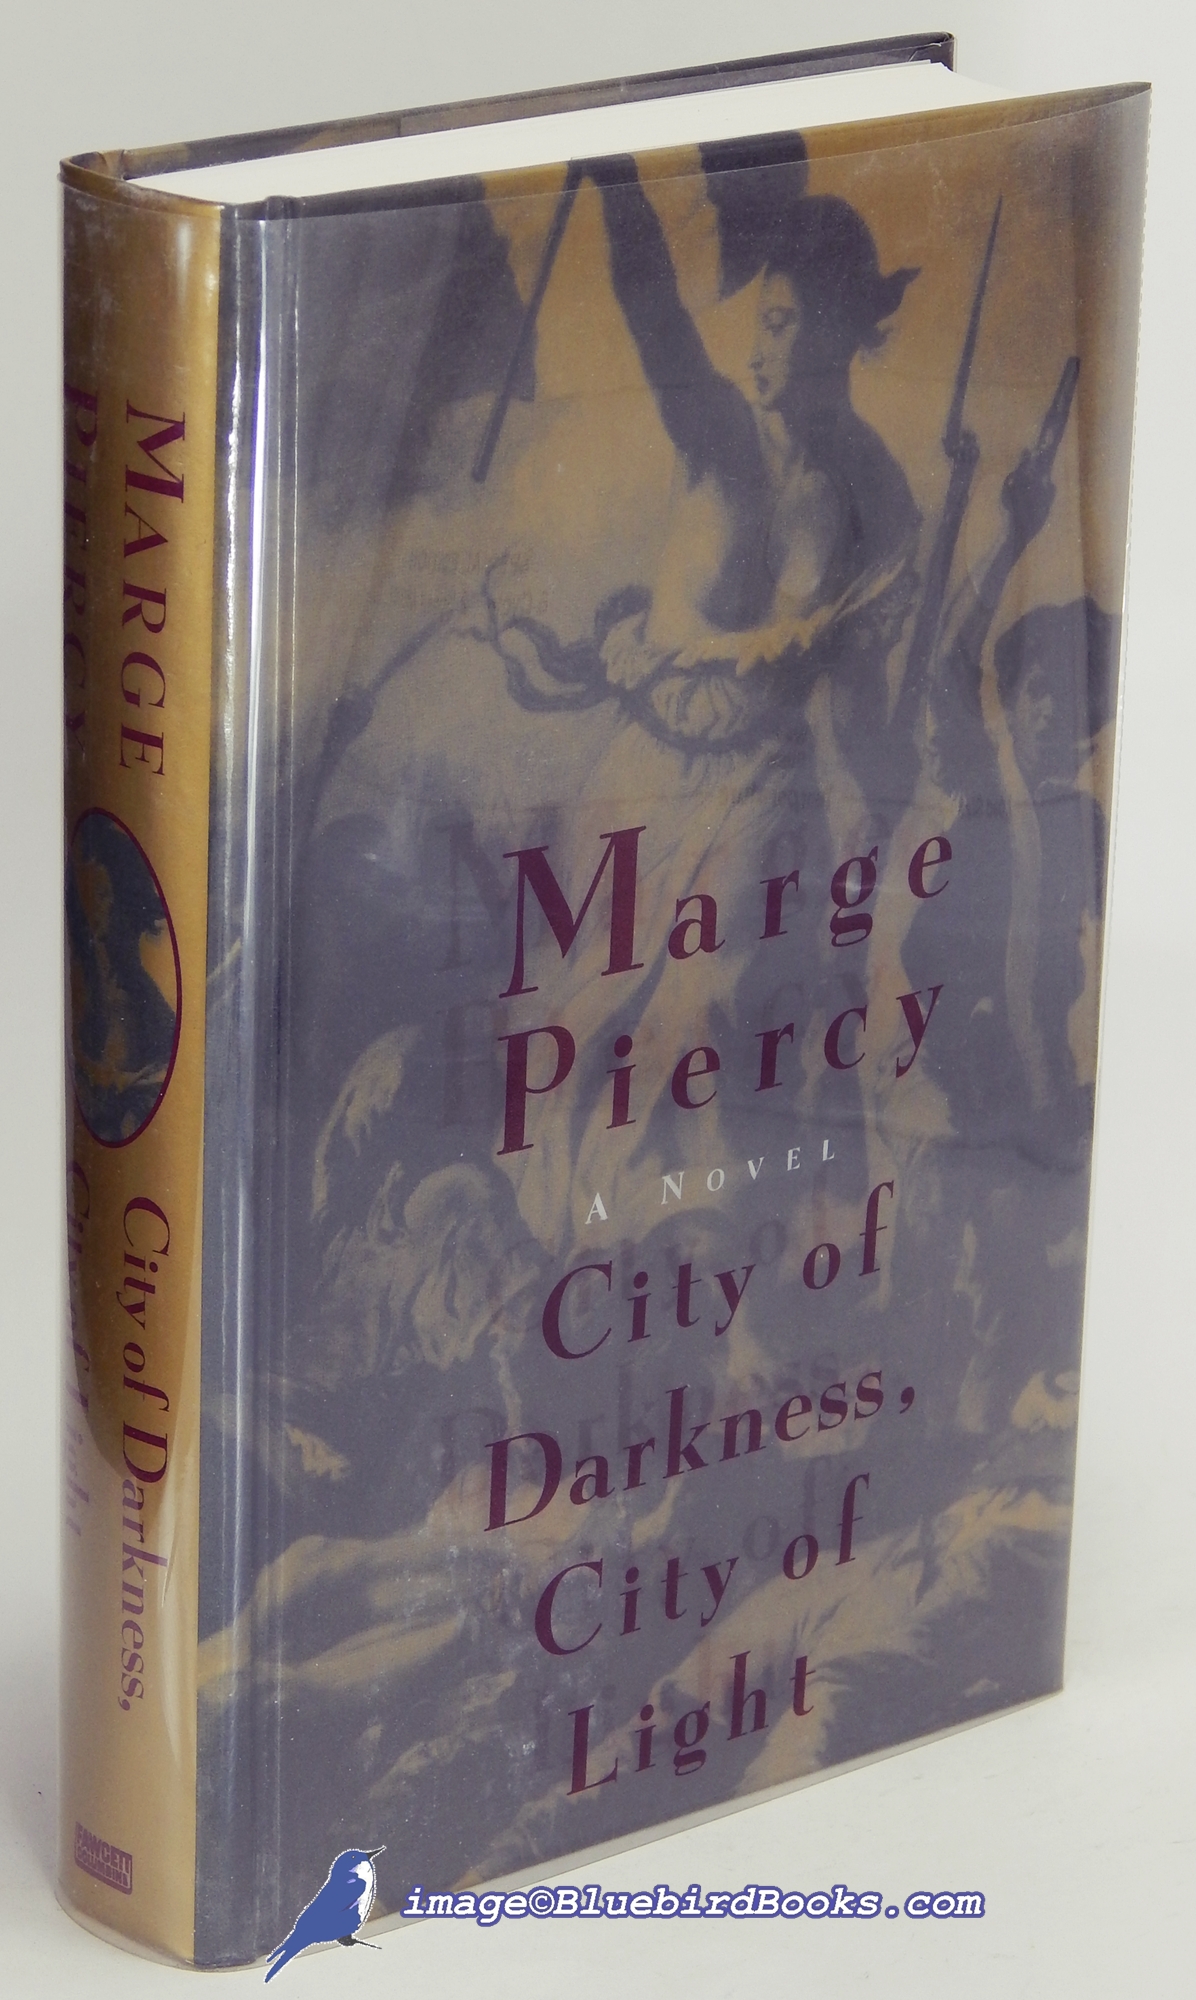 PIERCY, MARGE - City of Darkness, City of Light